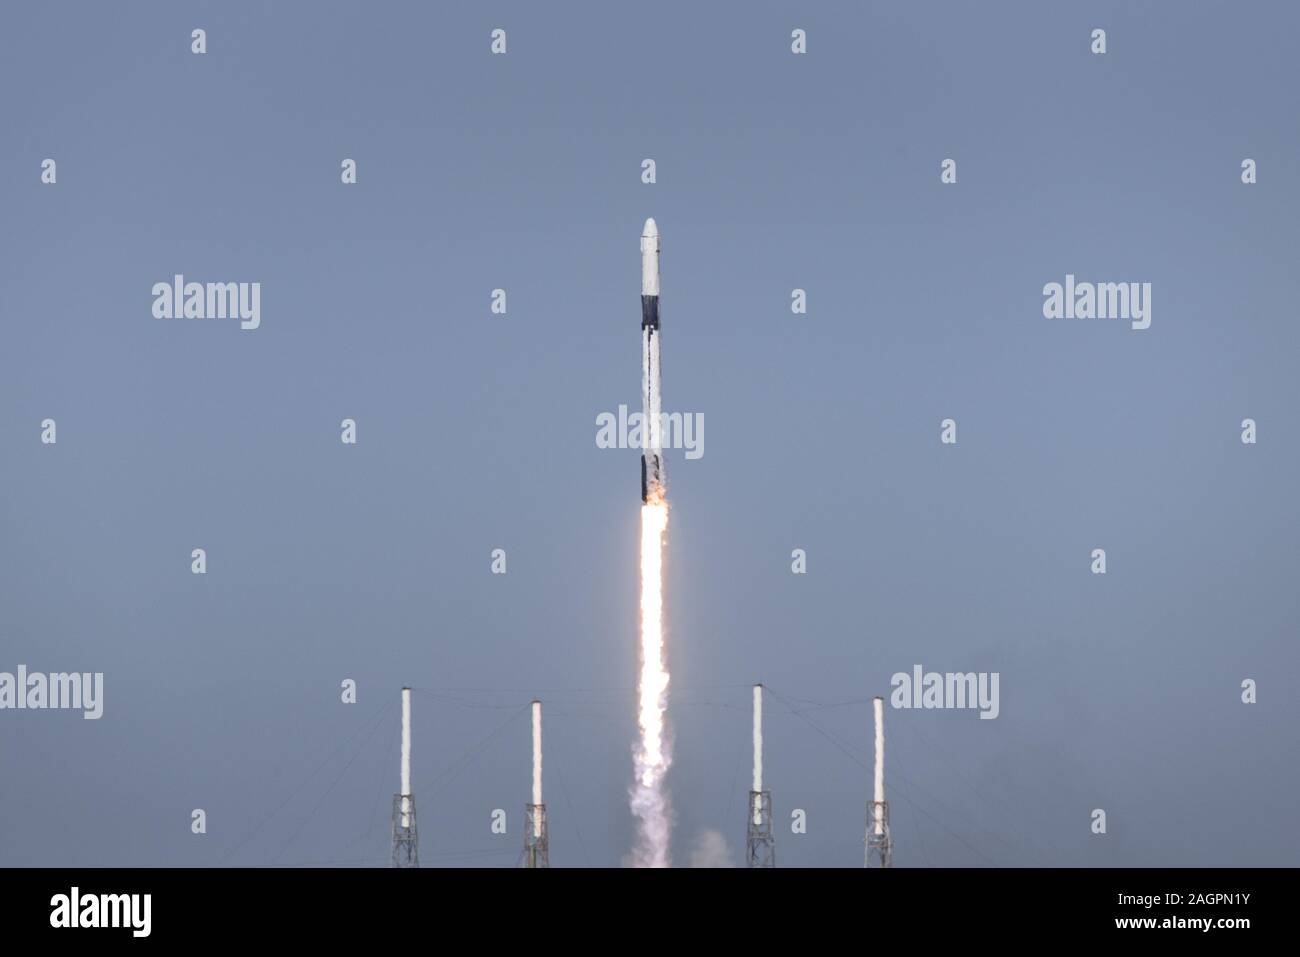 A SpaceX Falcon 9 CRS-19 rocket launched at Cape Canaveral Air Force Station, Florida, Dec. 5, 2019. The CRS-19 is the latest mission in the Commercial Resupply Services program which transports thousands of pounds of cargo and supplies to resupply the International Space Station. (U.S. Air Force photo by Joshua Clifford) Stock Photo